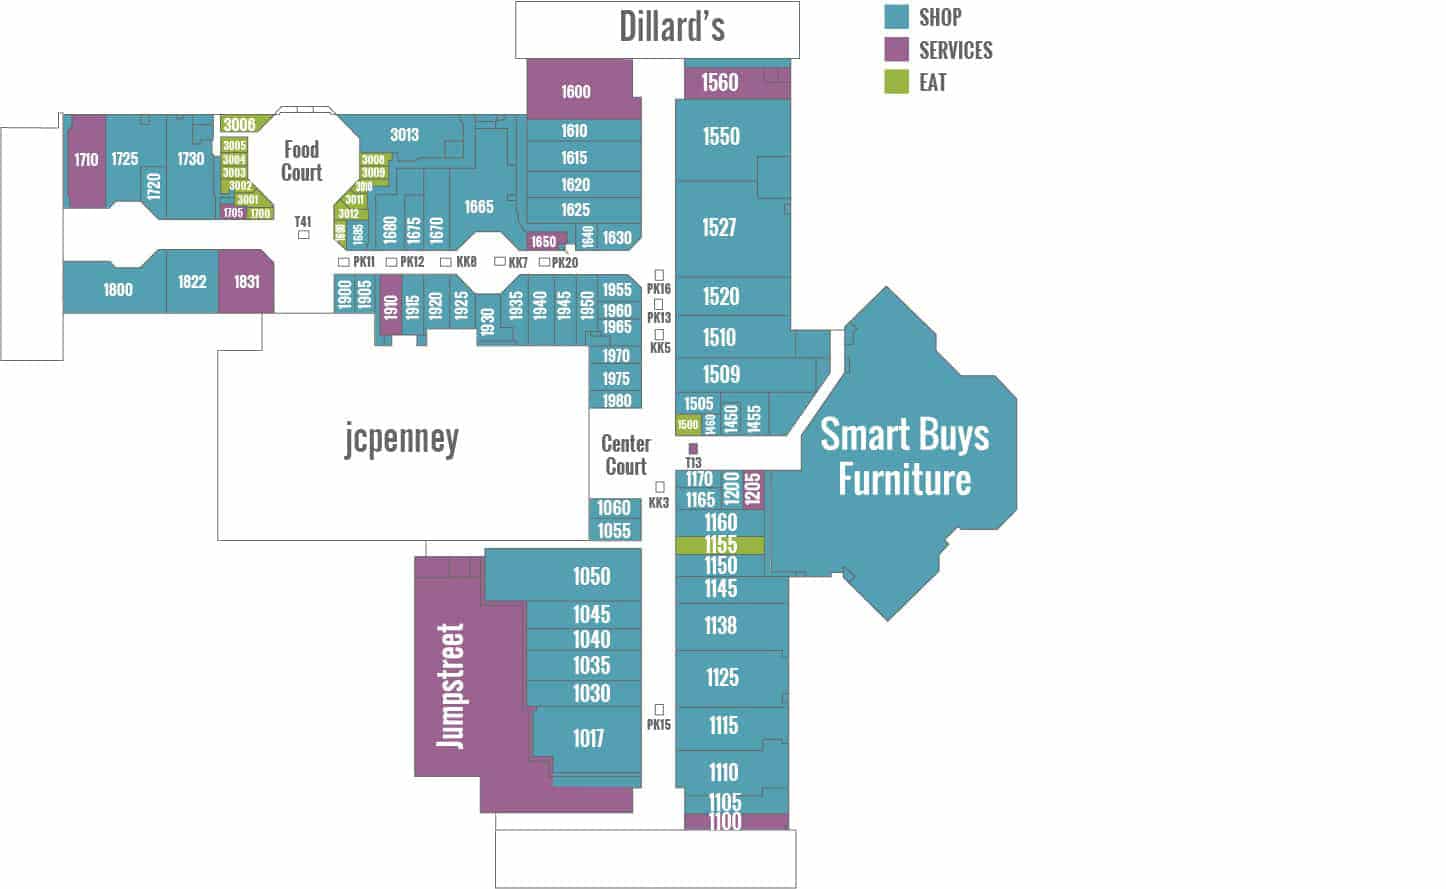 Directory Colorado Mills Mall Map - Labelscar The Retail History Blogforest...